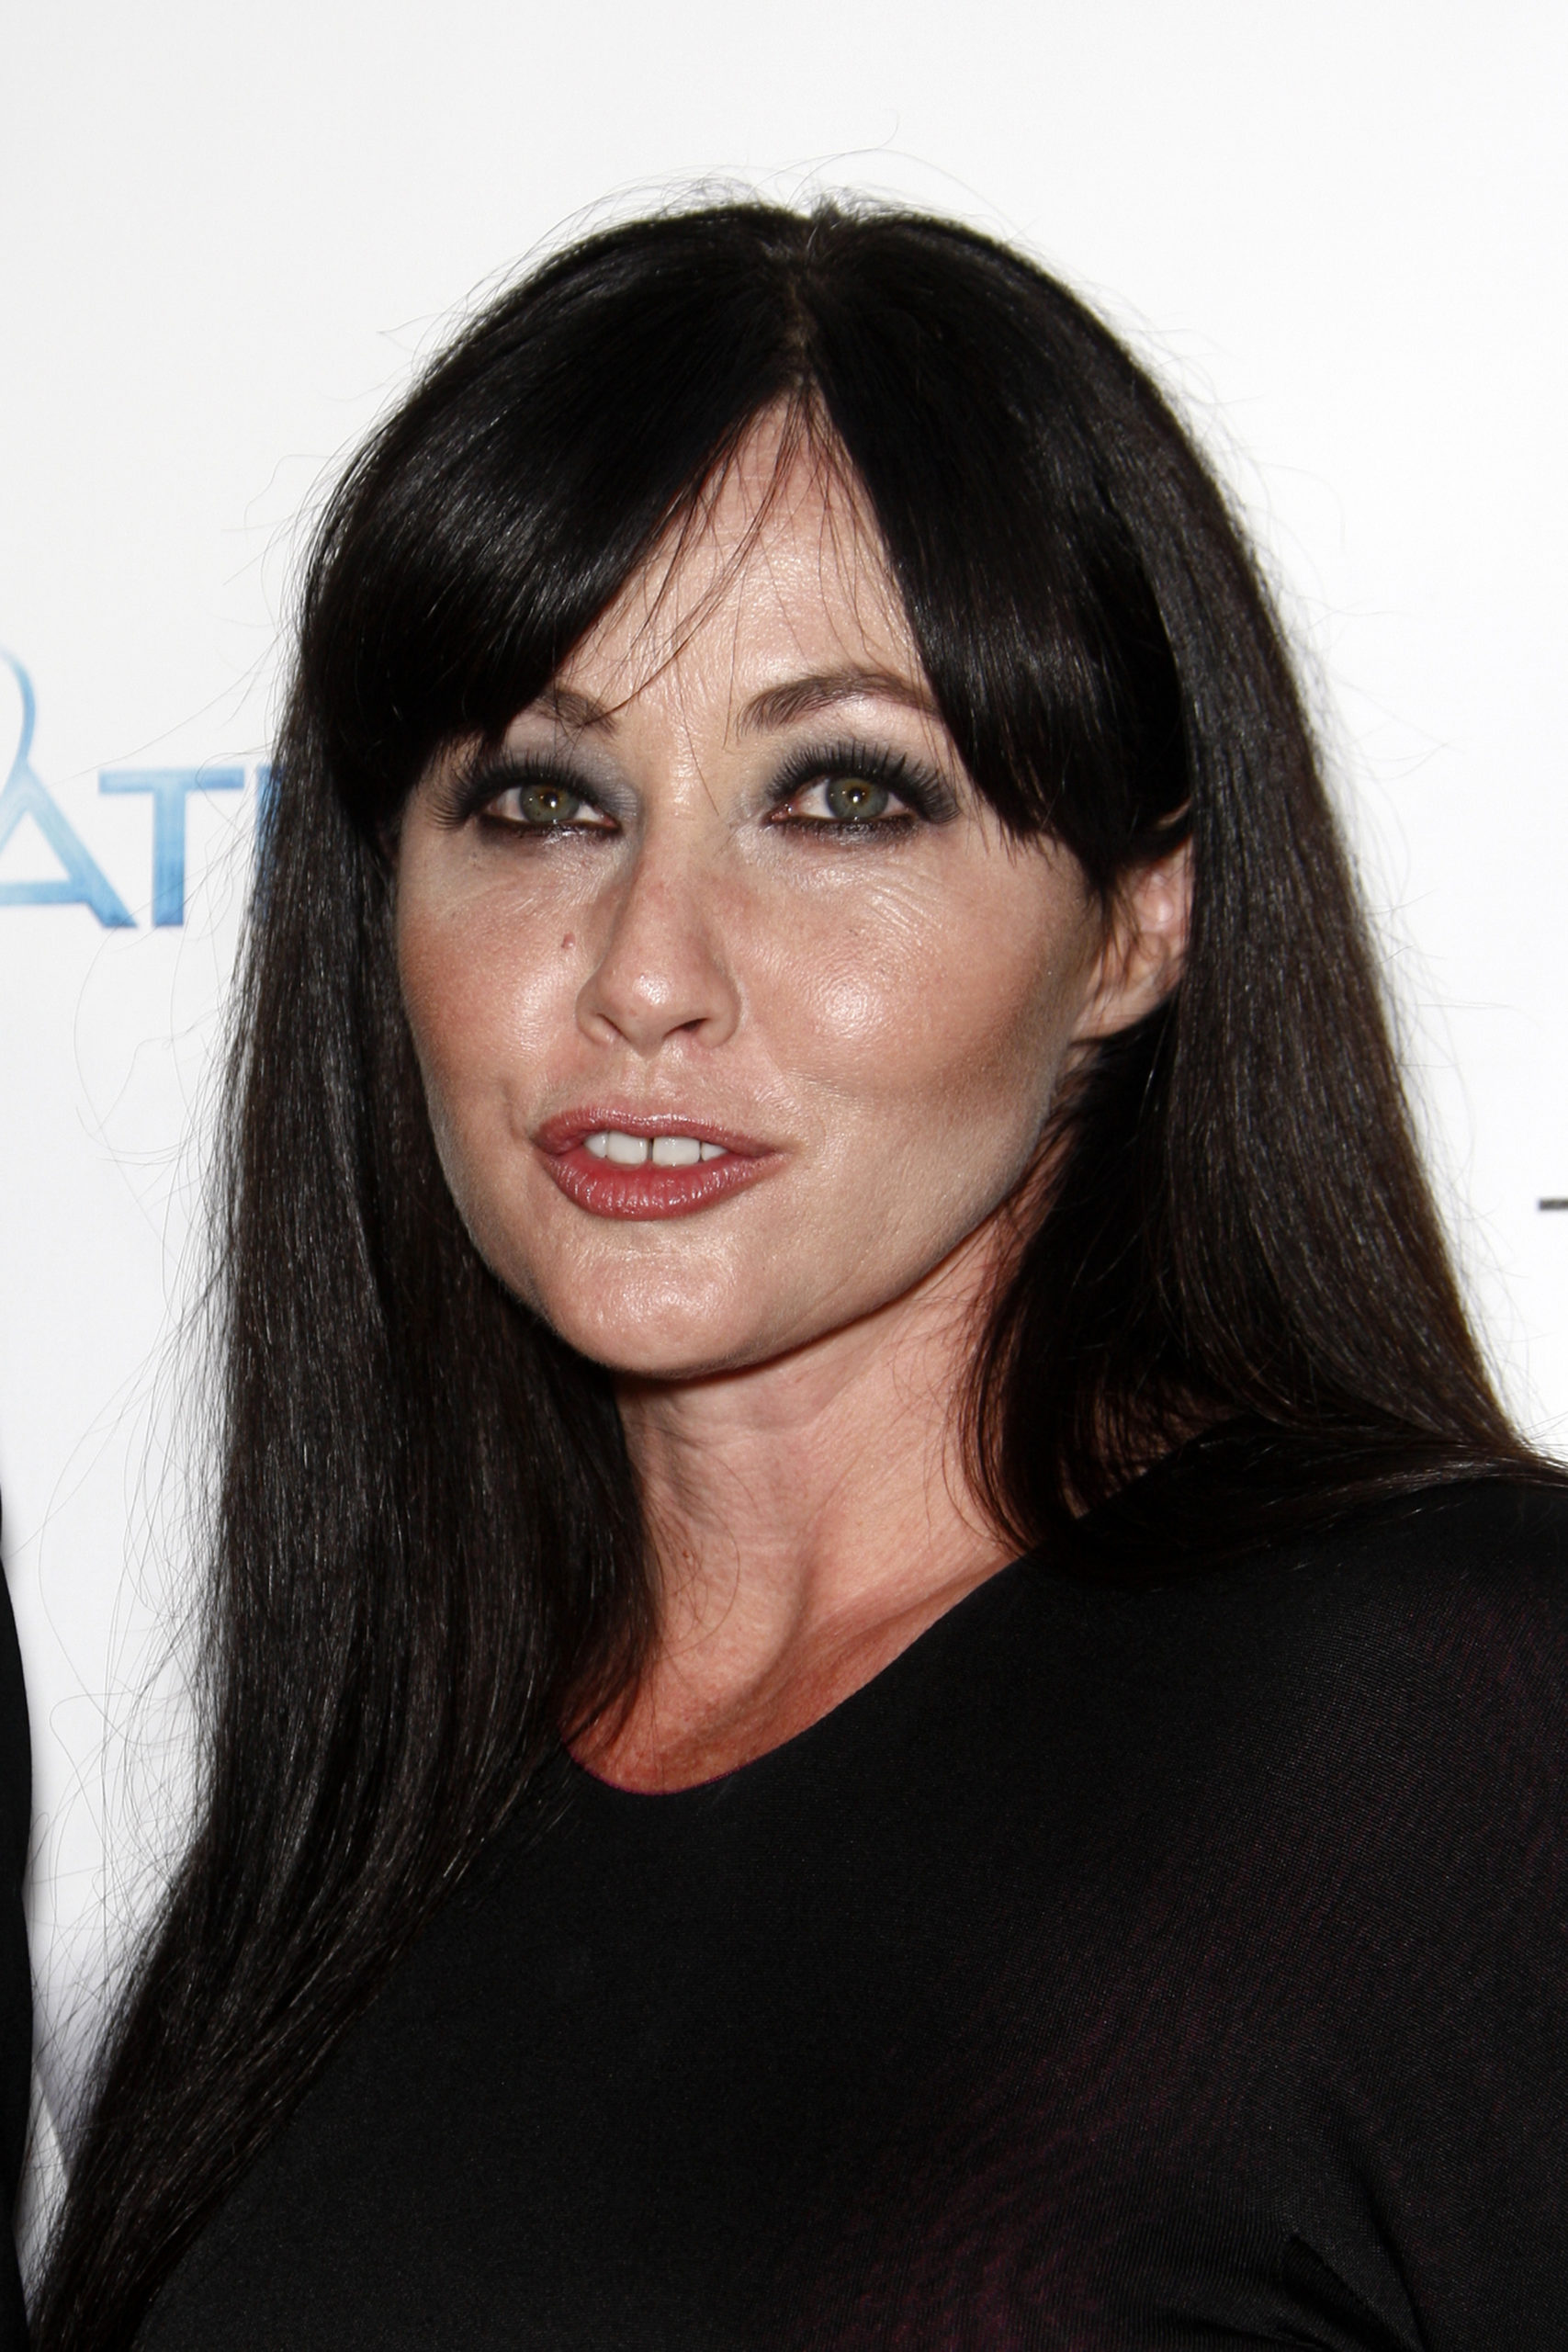 Hearts Break for Shannen Doherty as Her Representative Issues Devastating Statement | New reports are revealing that Shannen Doherty has made a difficult decision regarding her 11-year marriage.